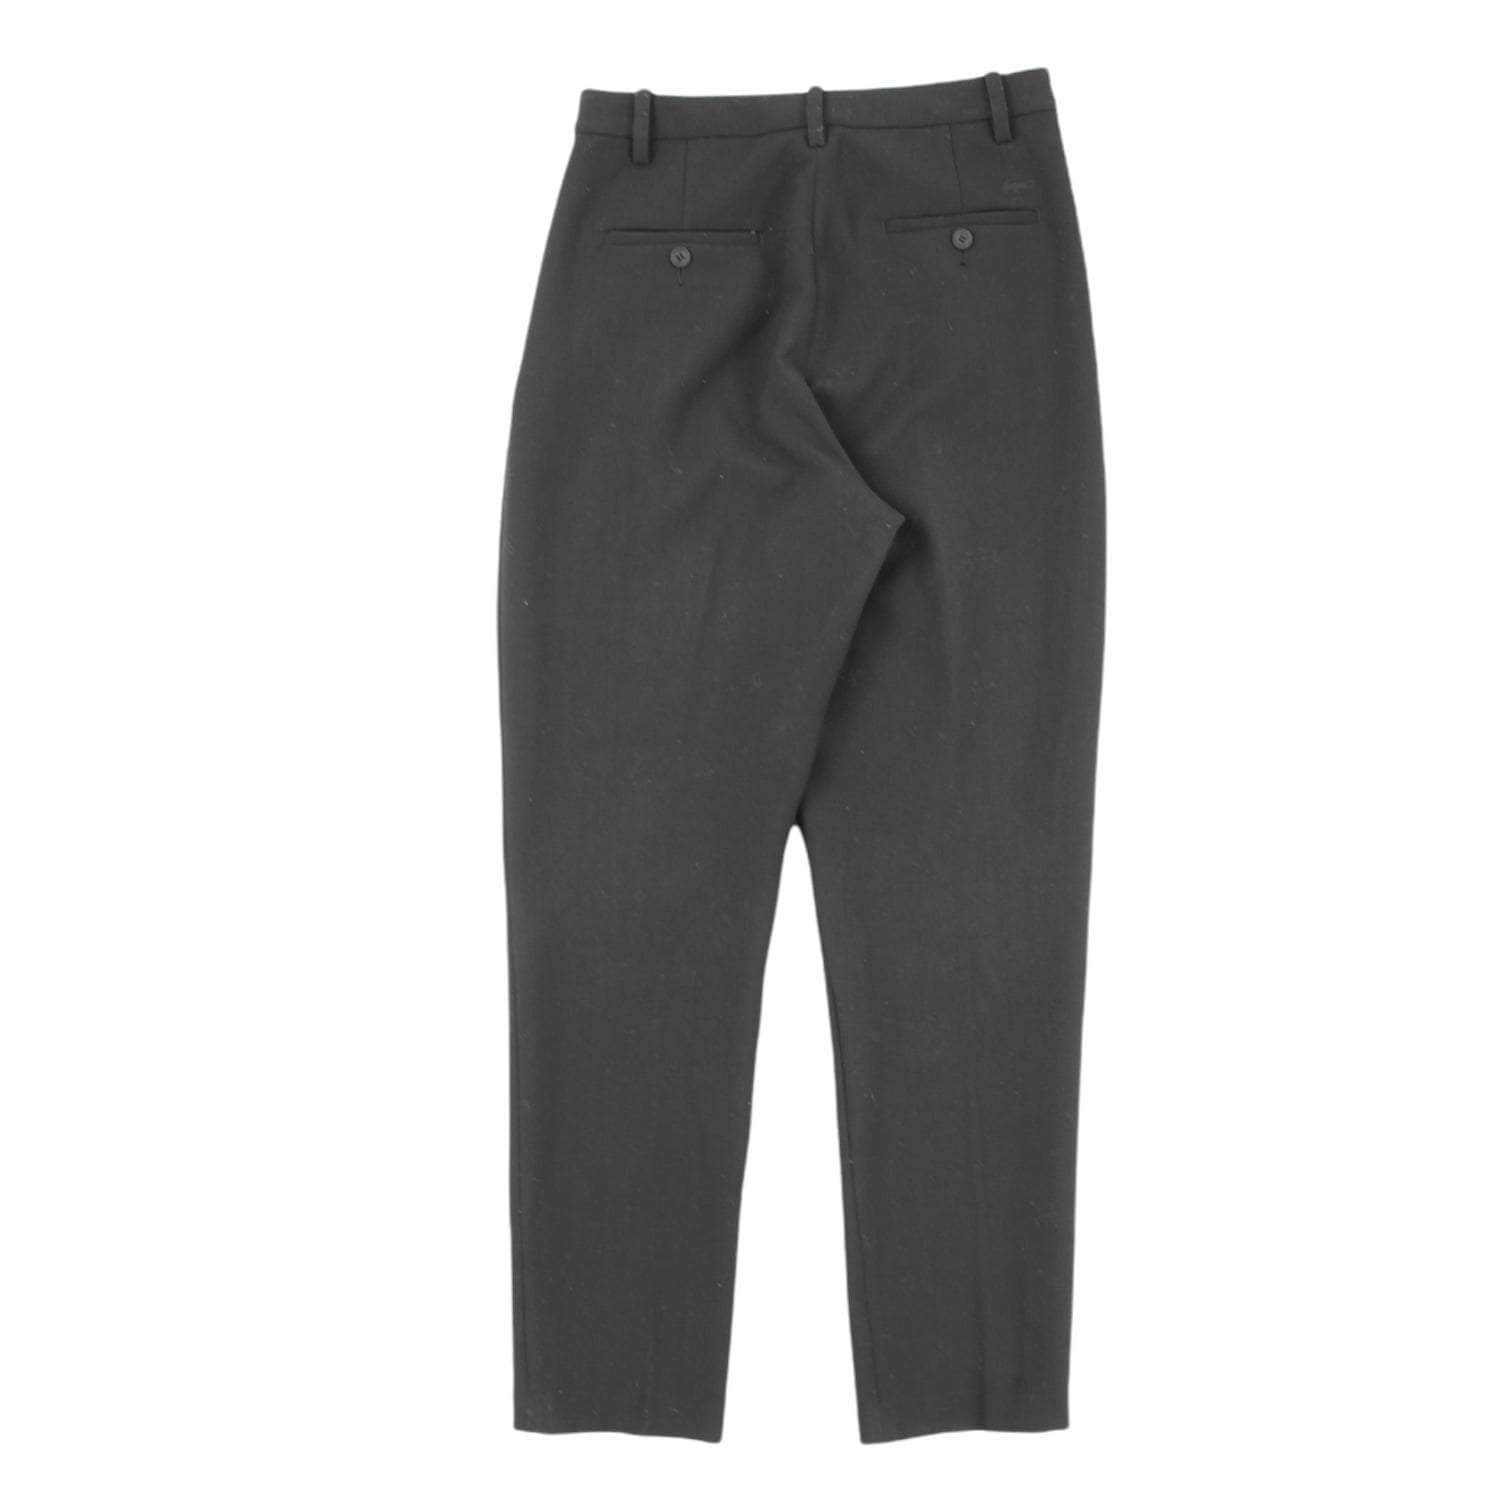 Lacoste Black Tapered Leg Trousers